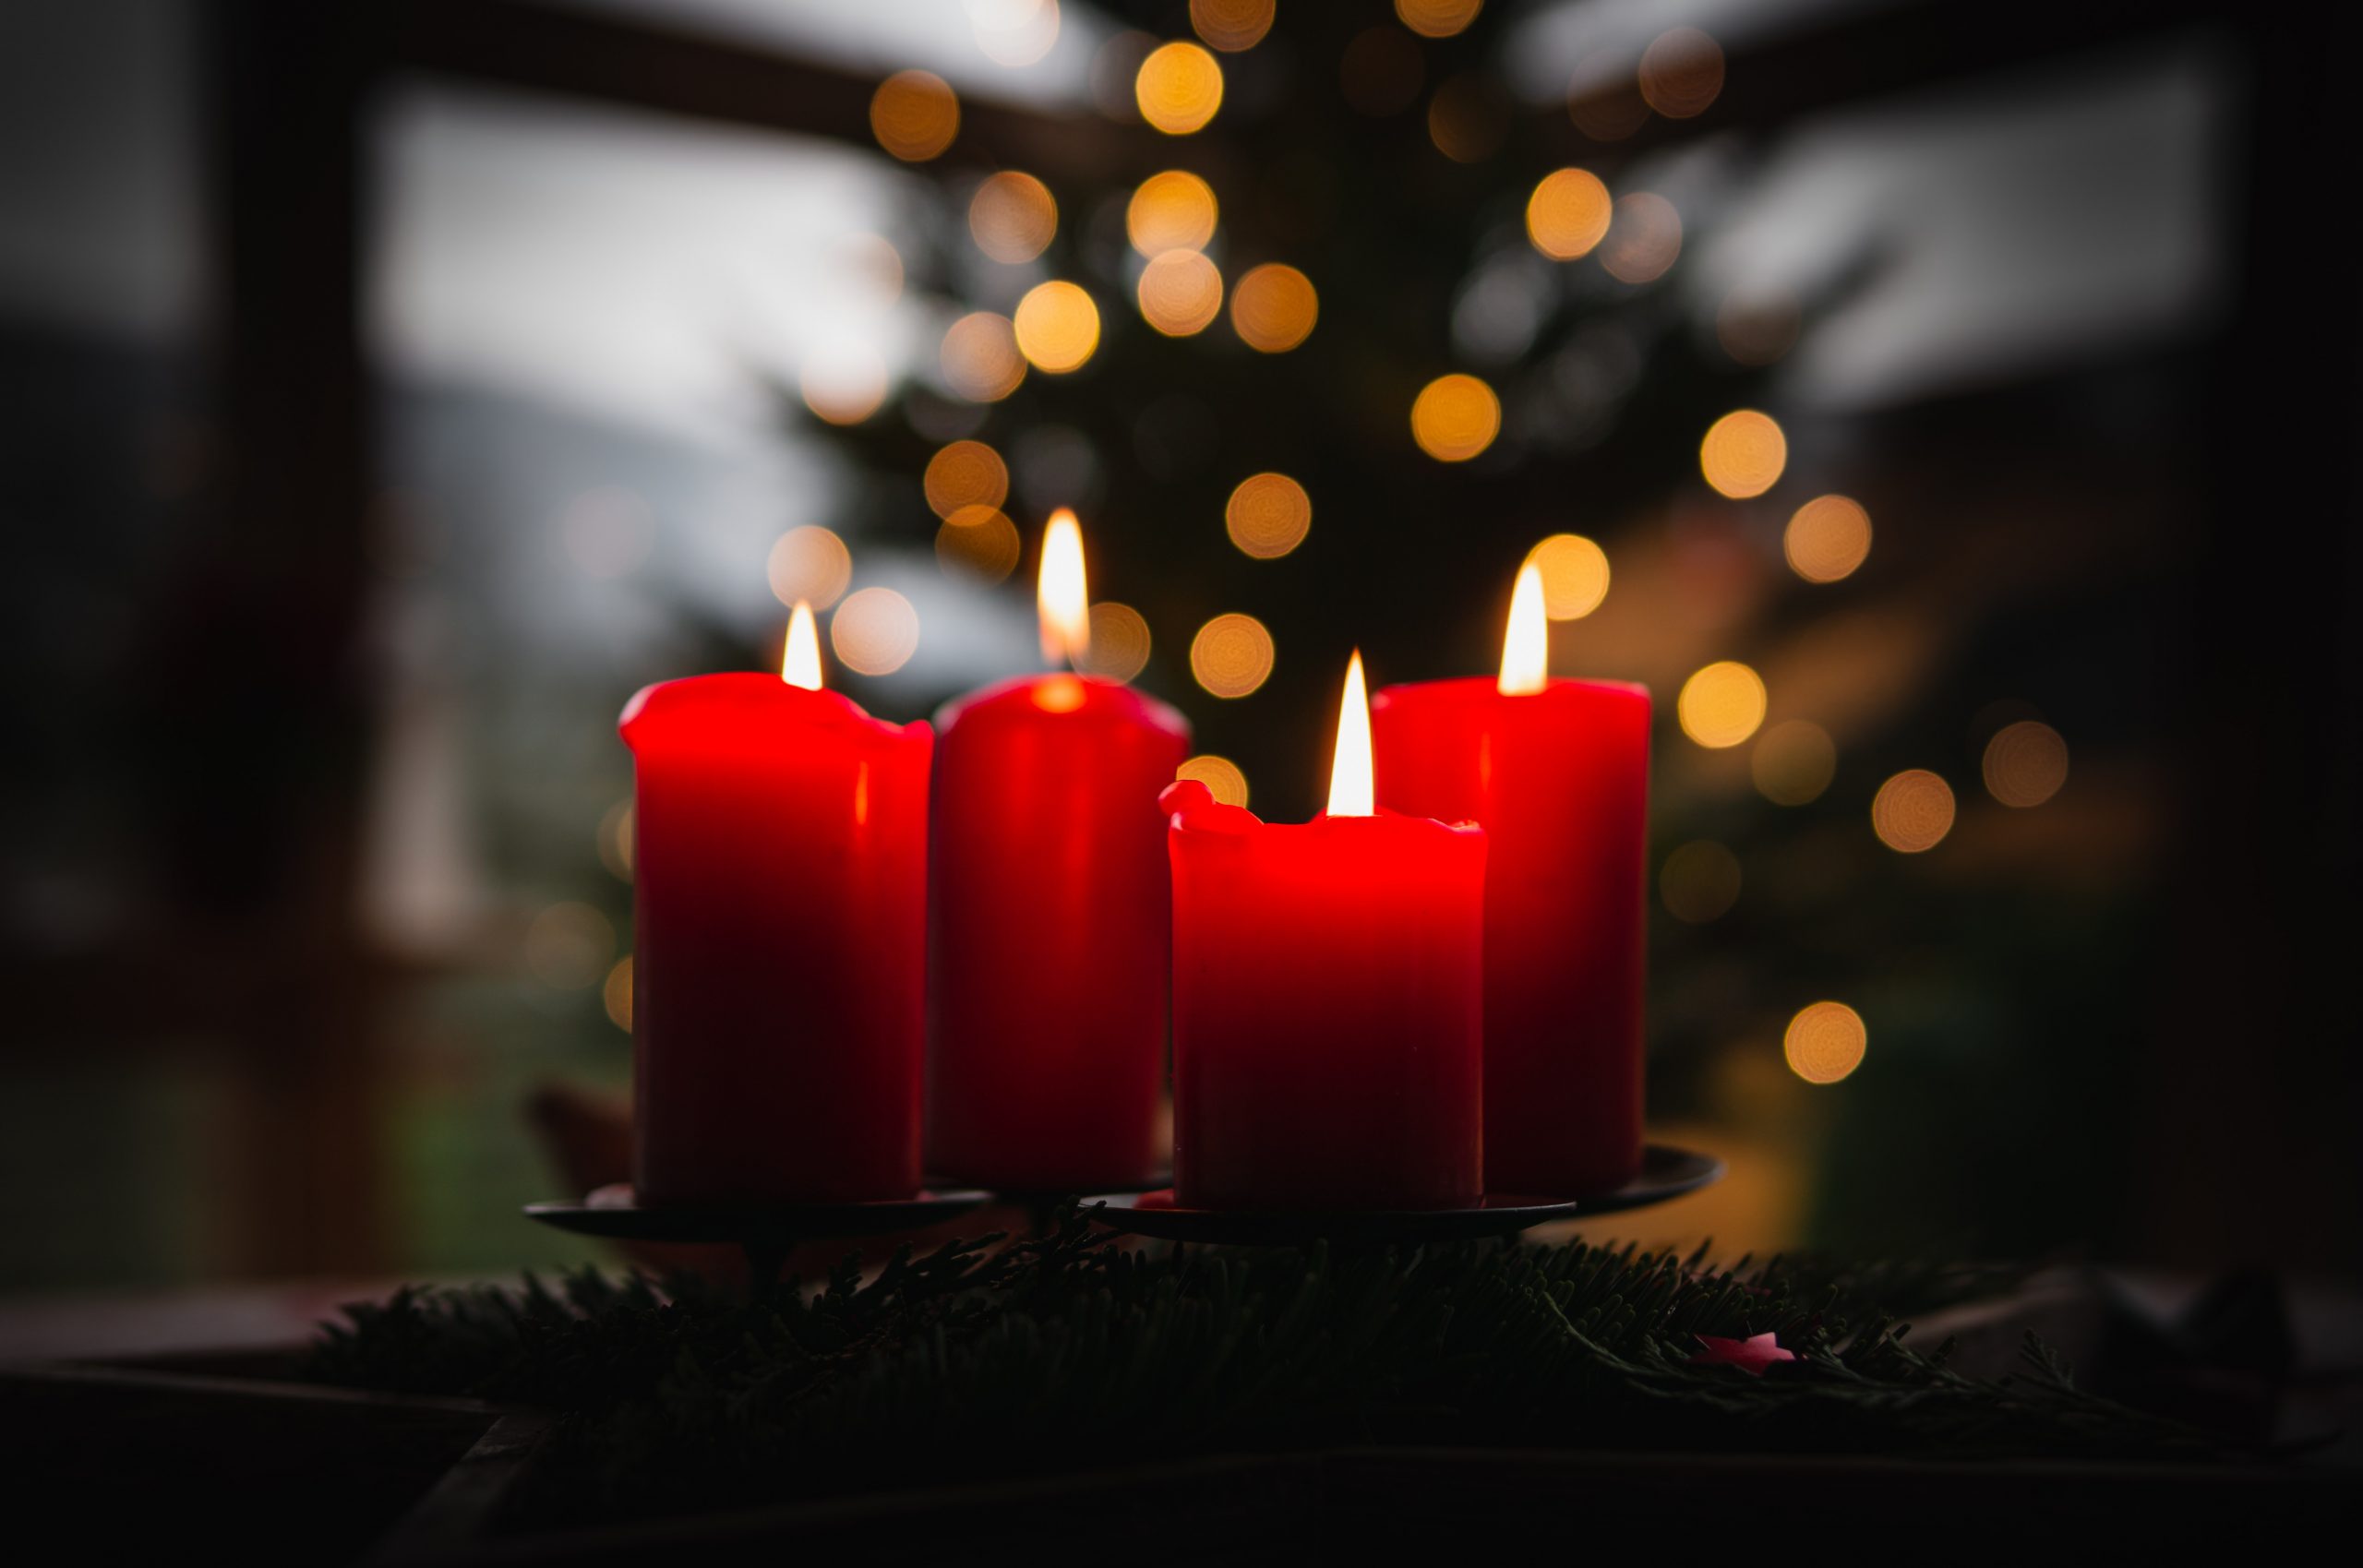 Four red Advent candles are lit, while a blurred Christmas tree and lights are in the background.